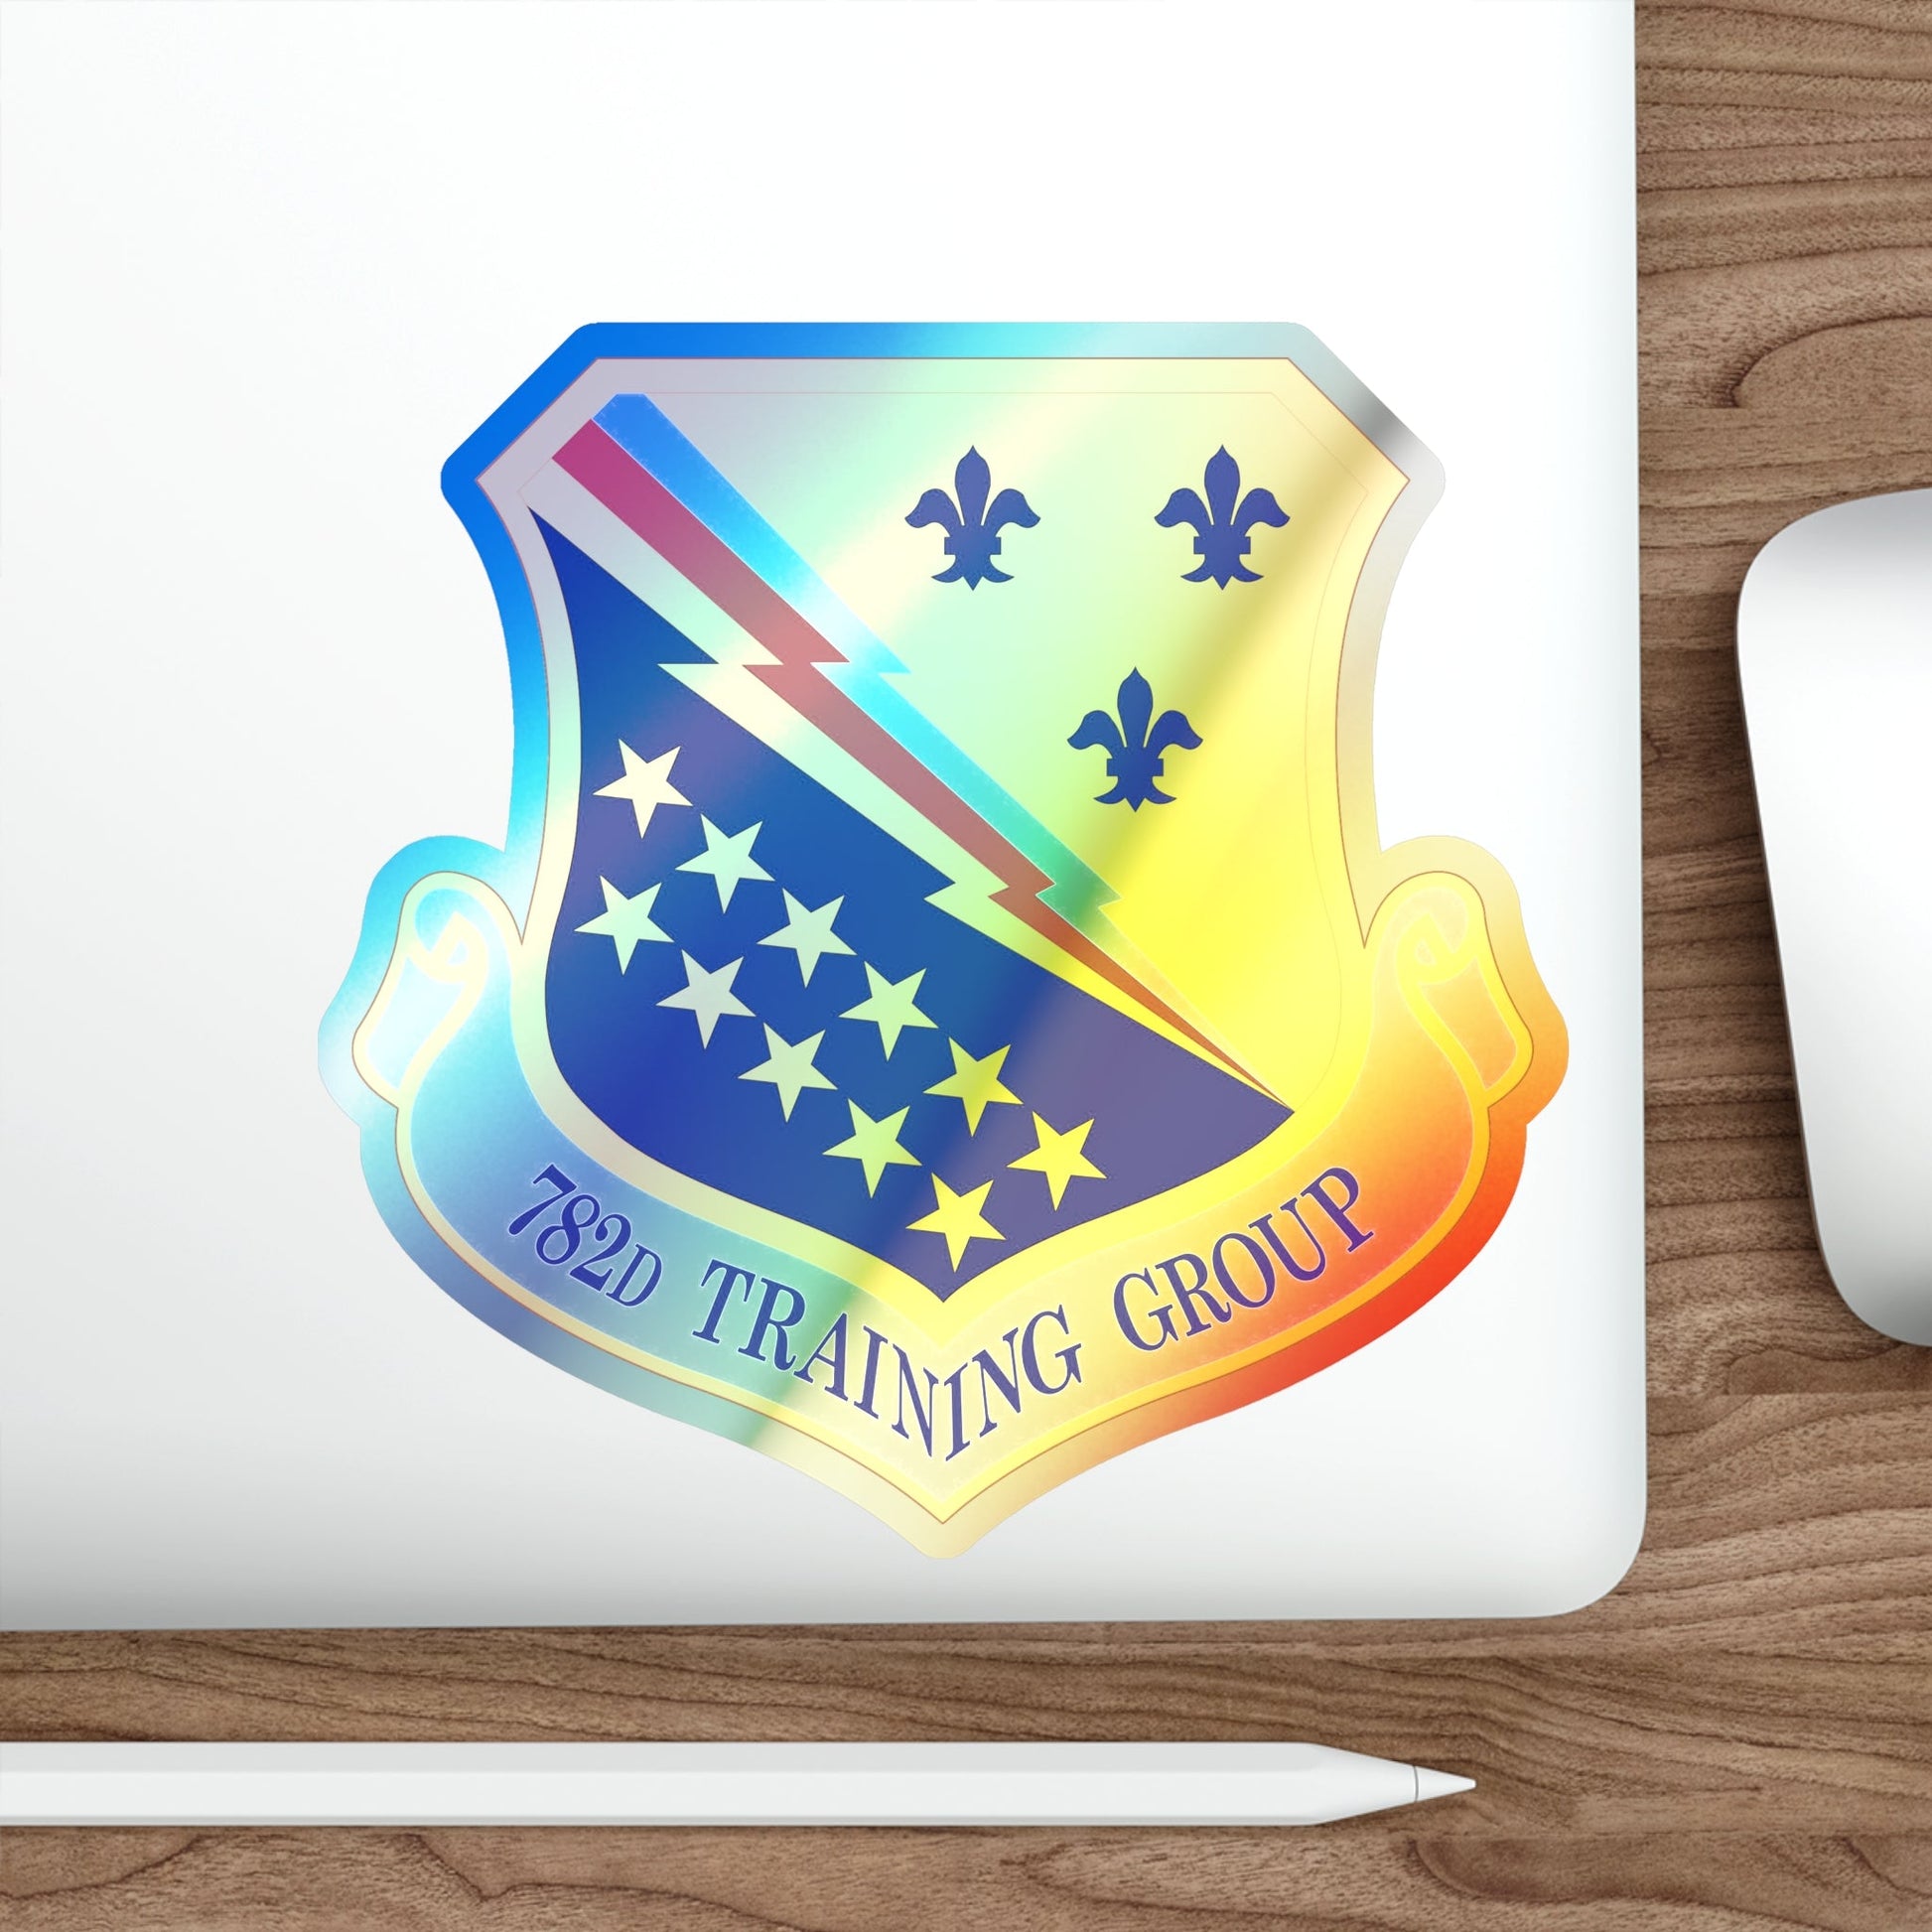 782d Training Group (U.S. Air Force) Holographic STICKER Die-Cut Vinyl Decal-The Sticker Space